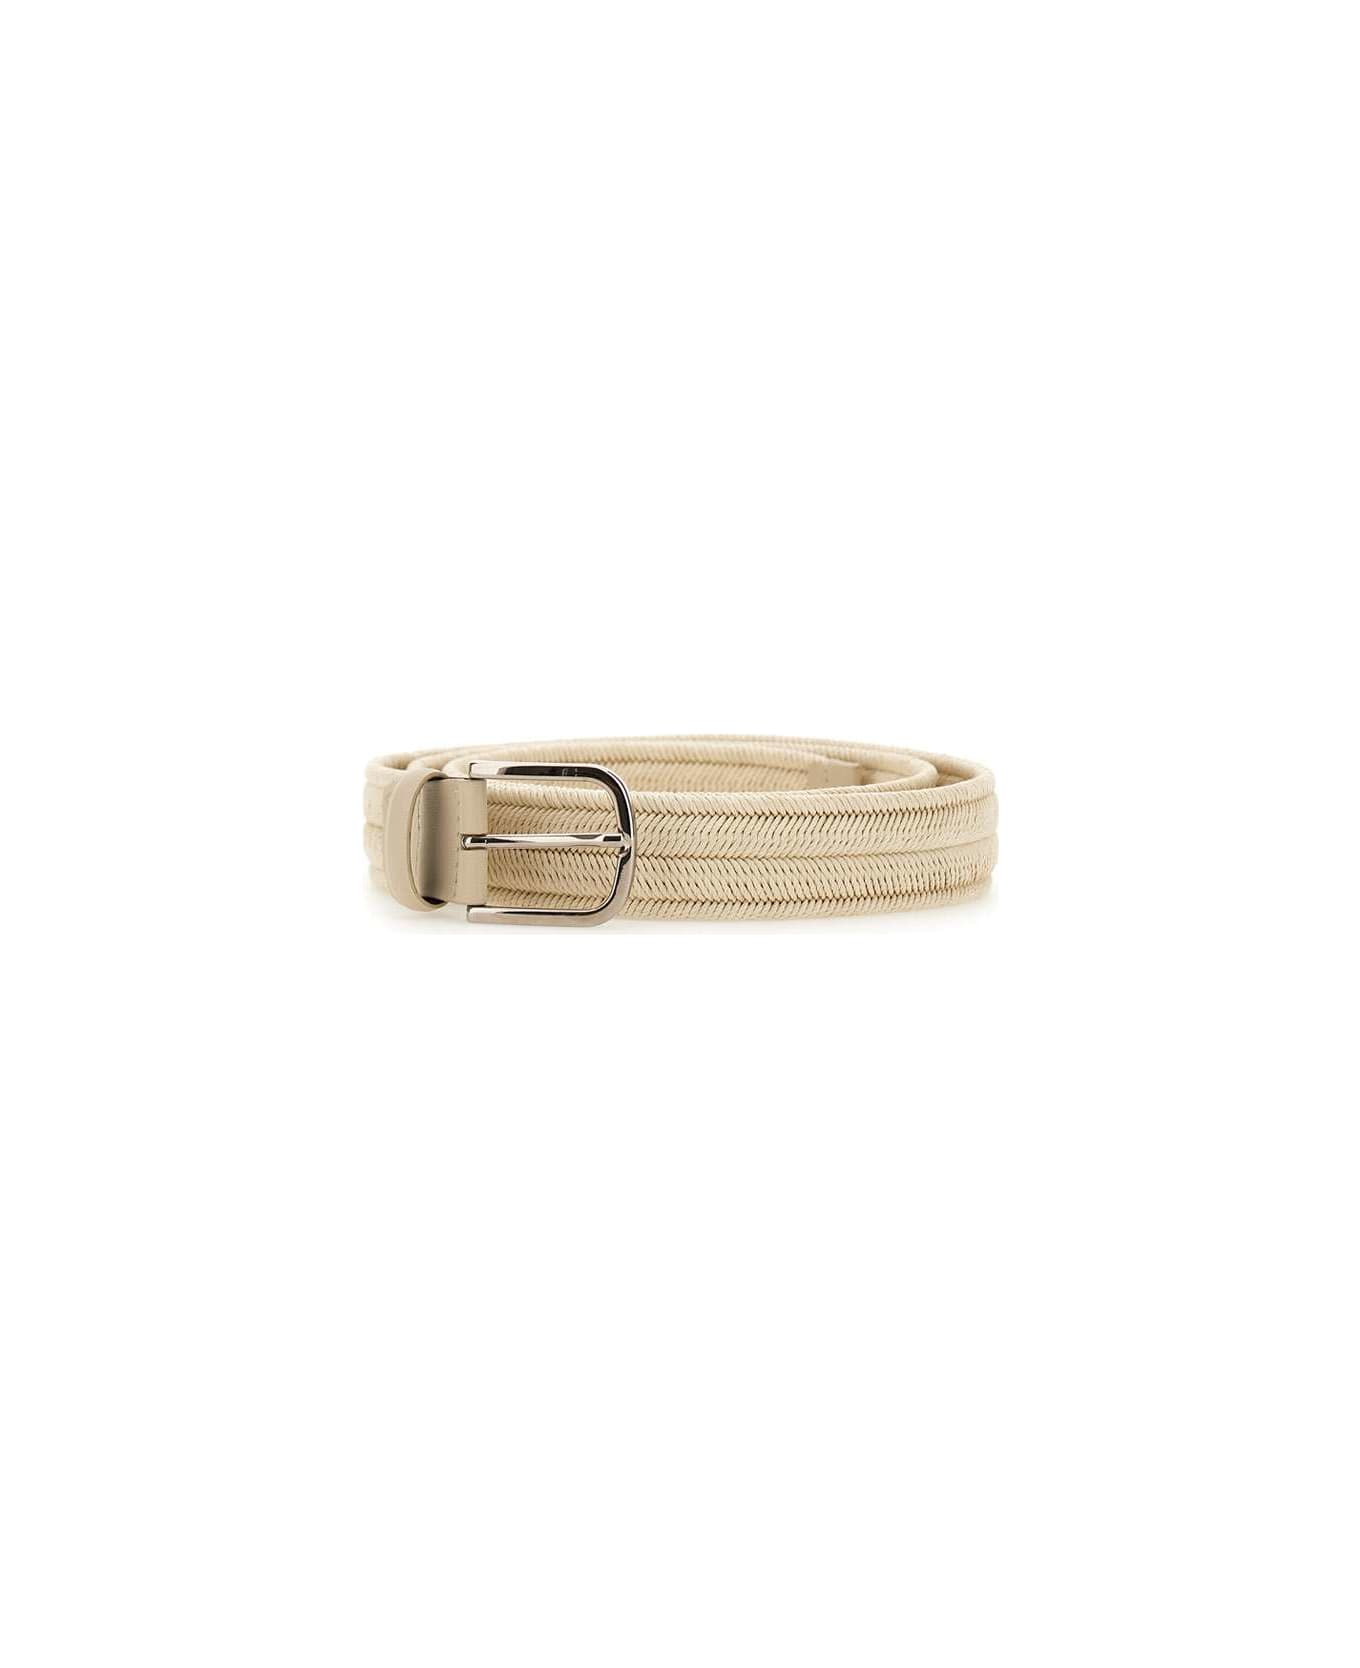 Orciani Cotton And Leather Belt - BEIGE